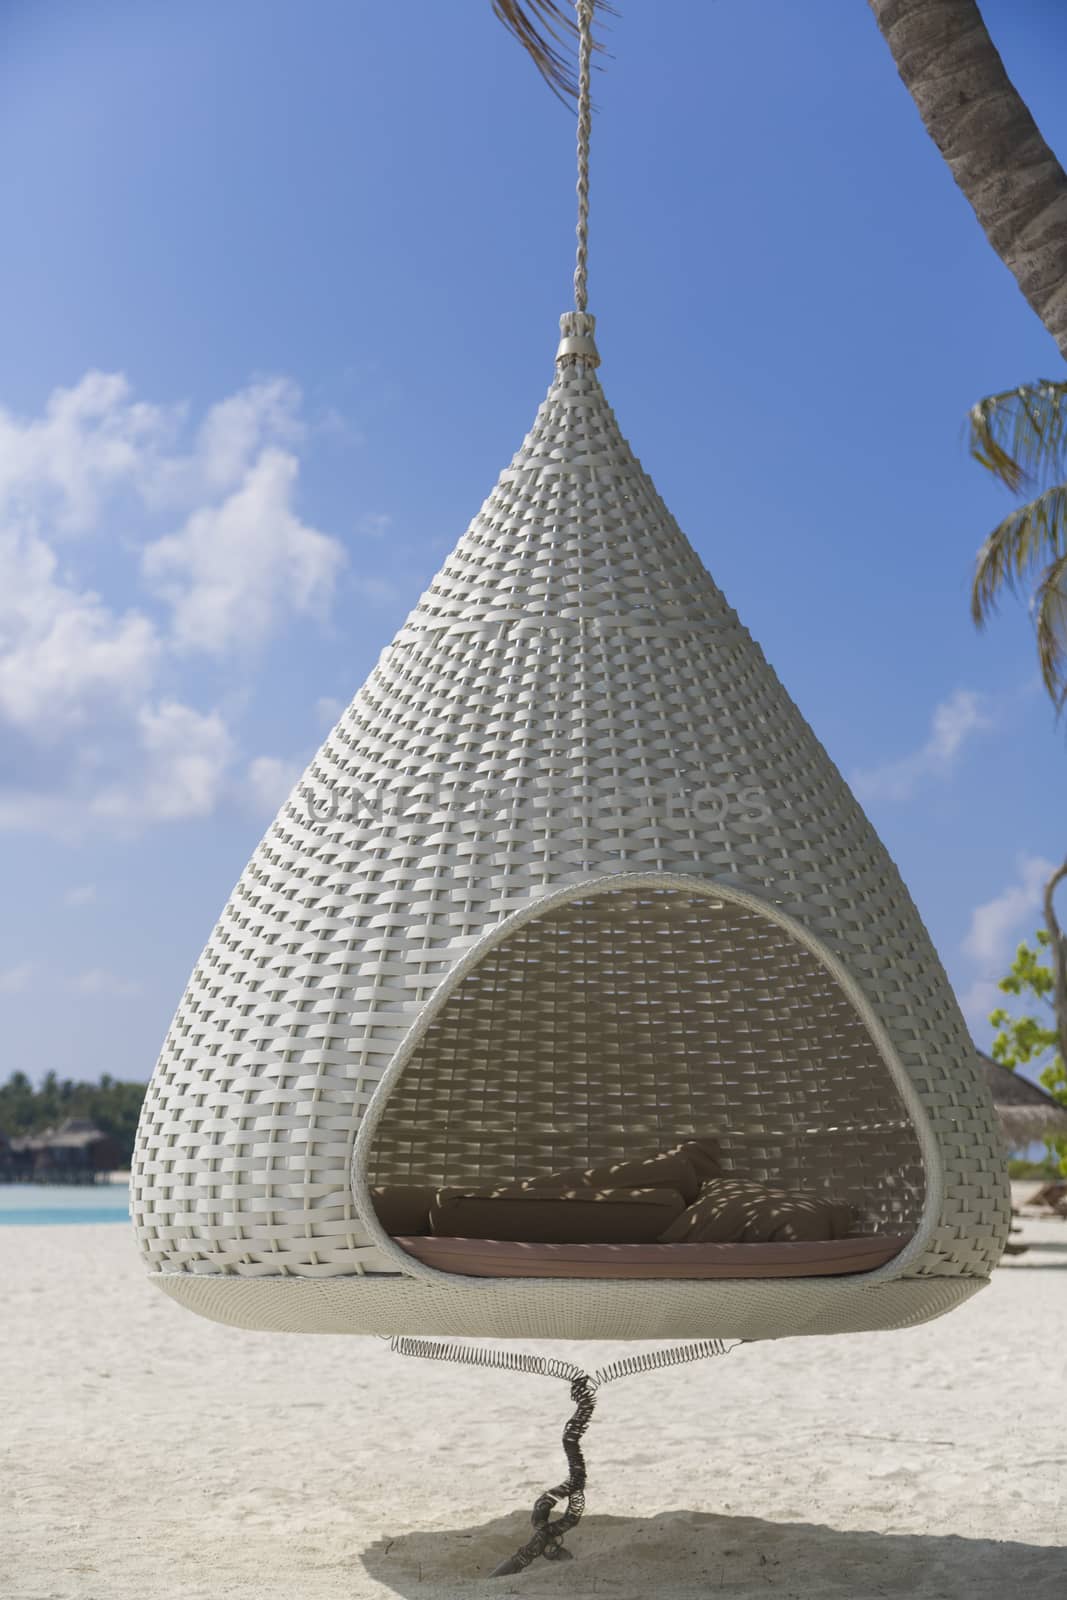 Detail of the inside of a Cocoon hammock in the beach.